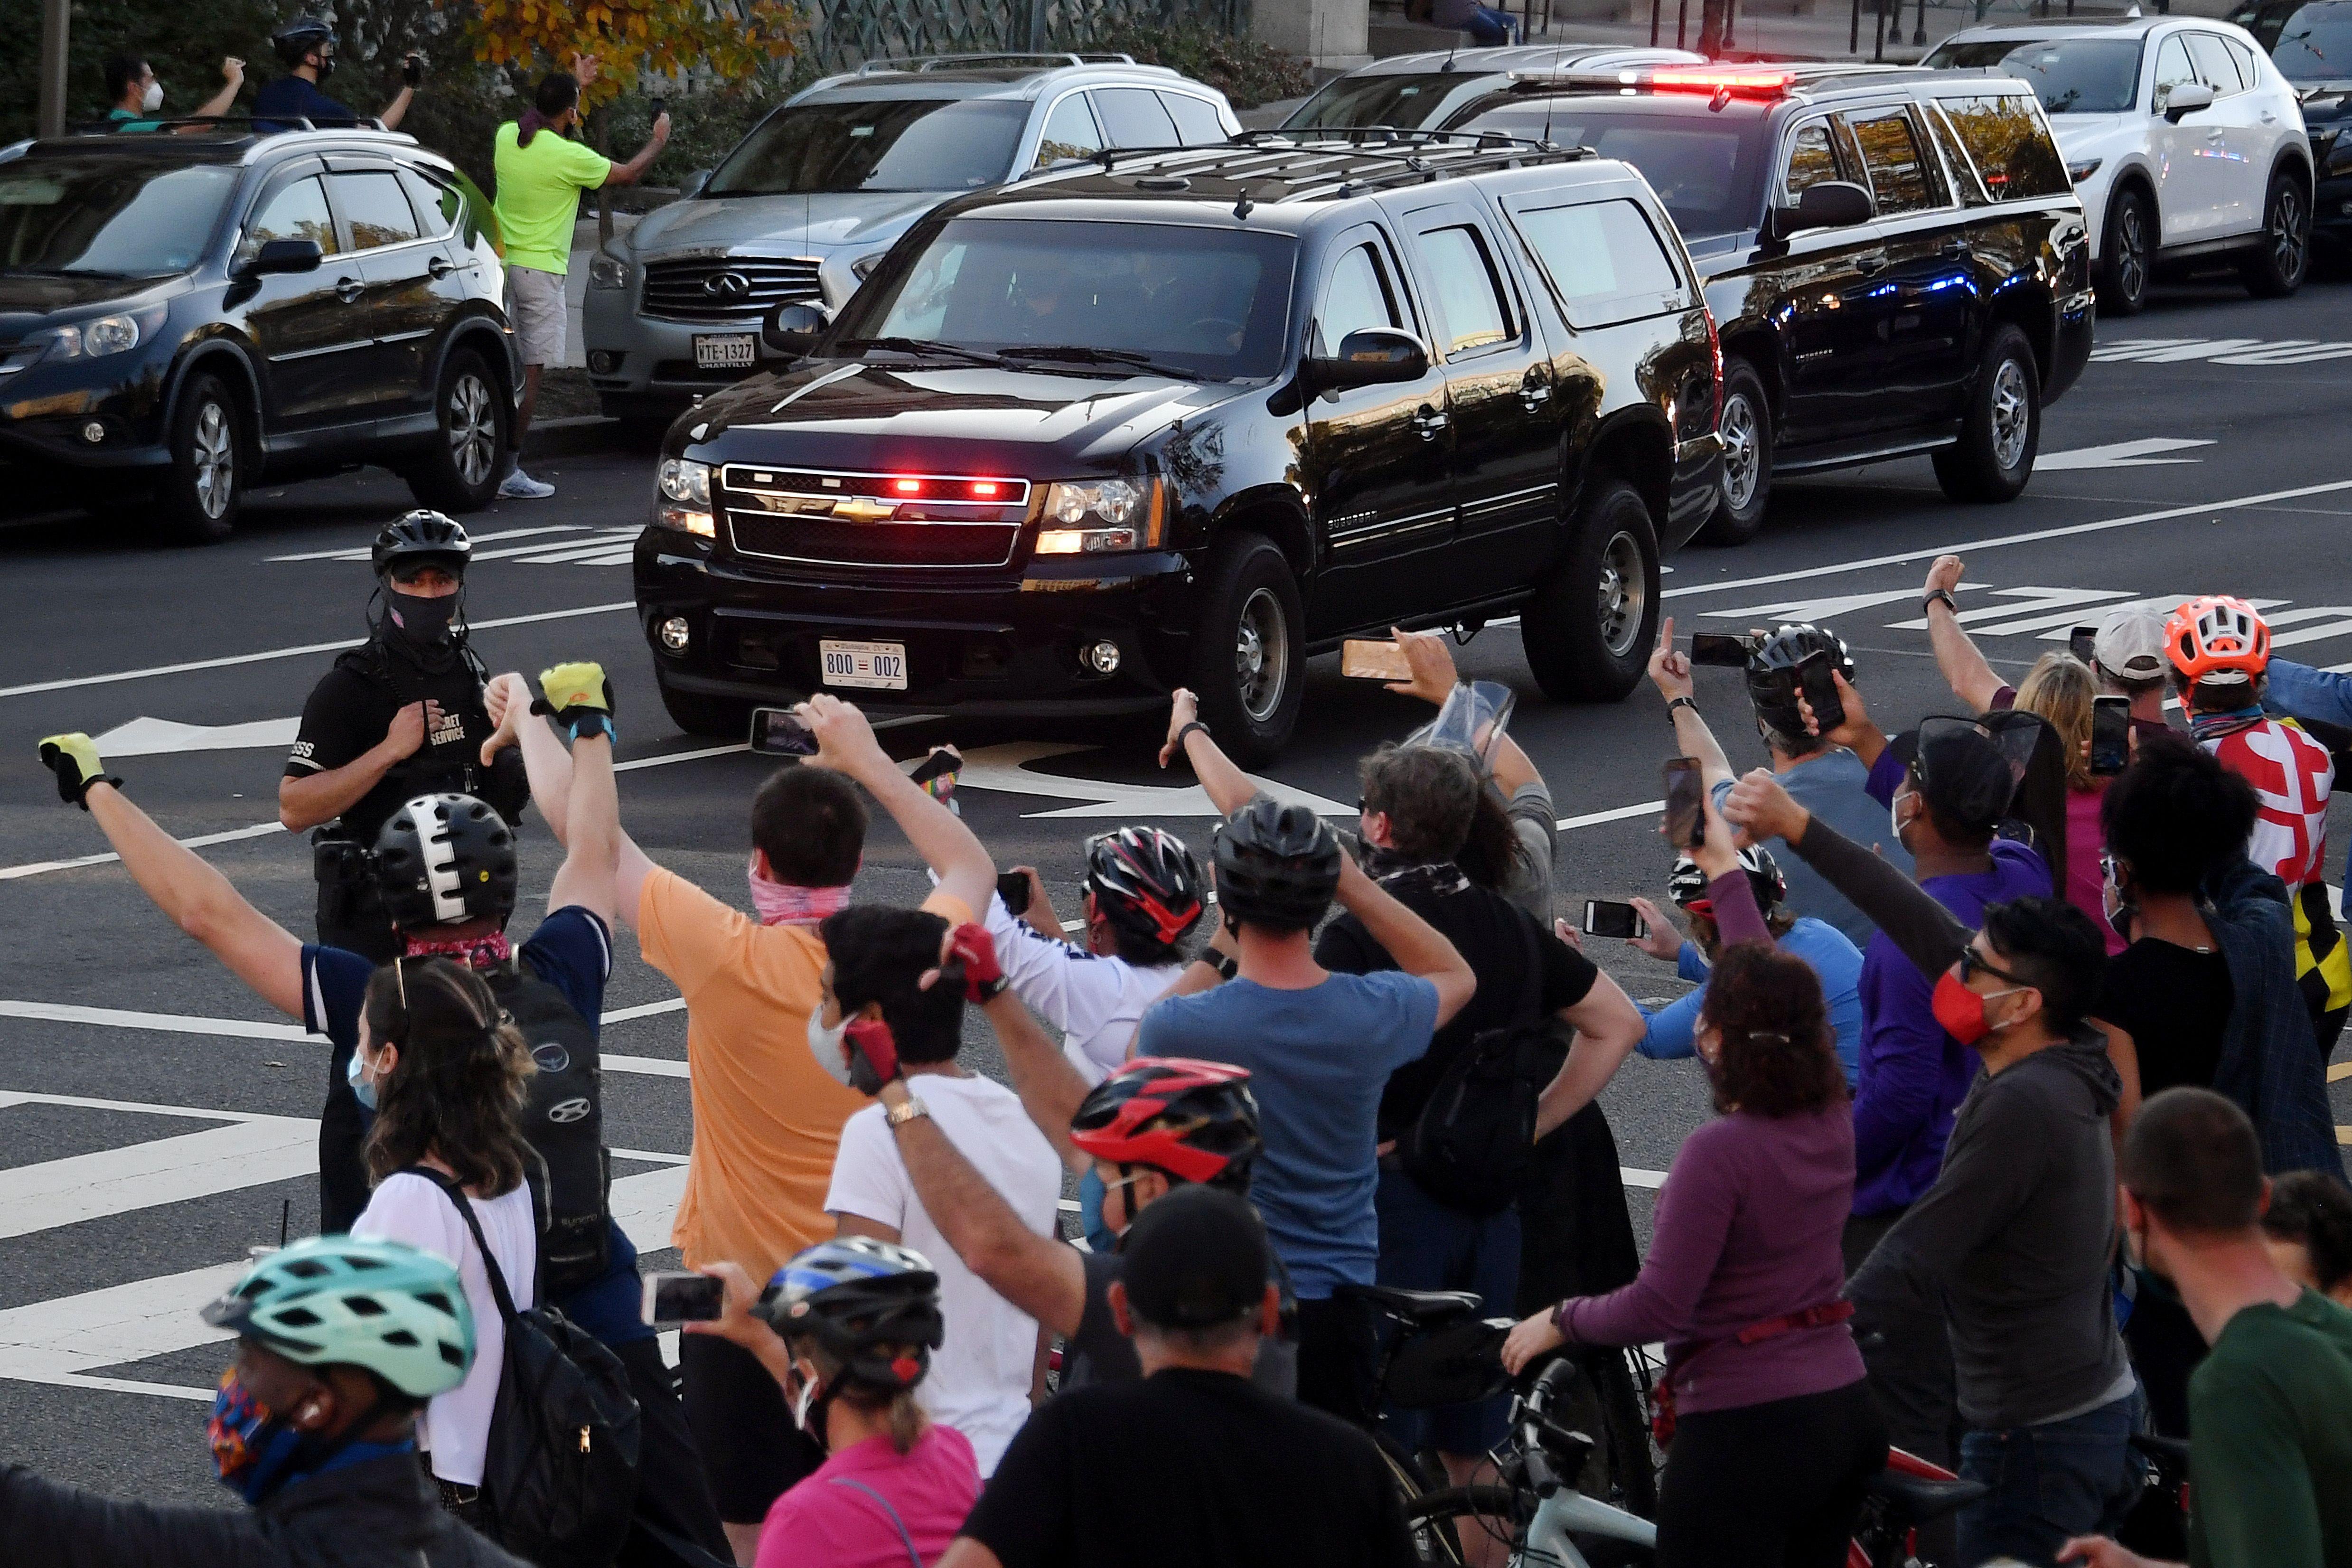 People react as the motorcade carrying President Donald Trump returns to the White House on November 7, 2020 in Washington, D.C.